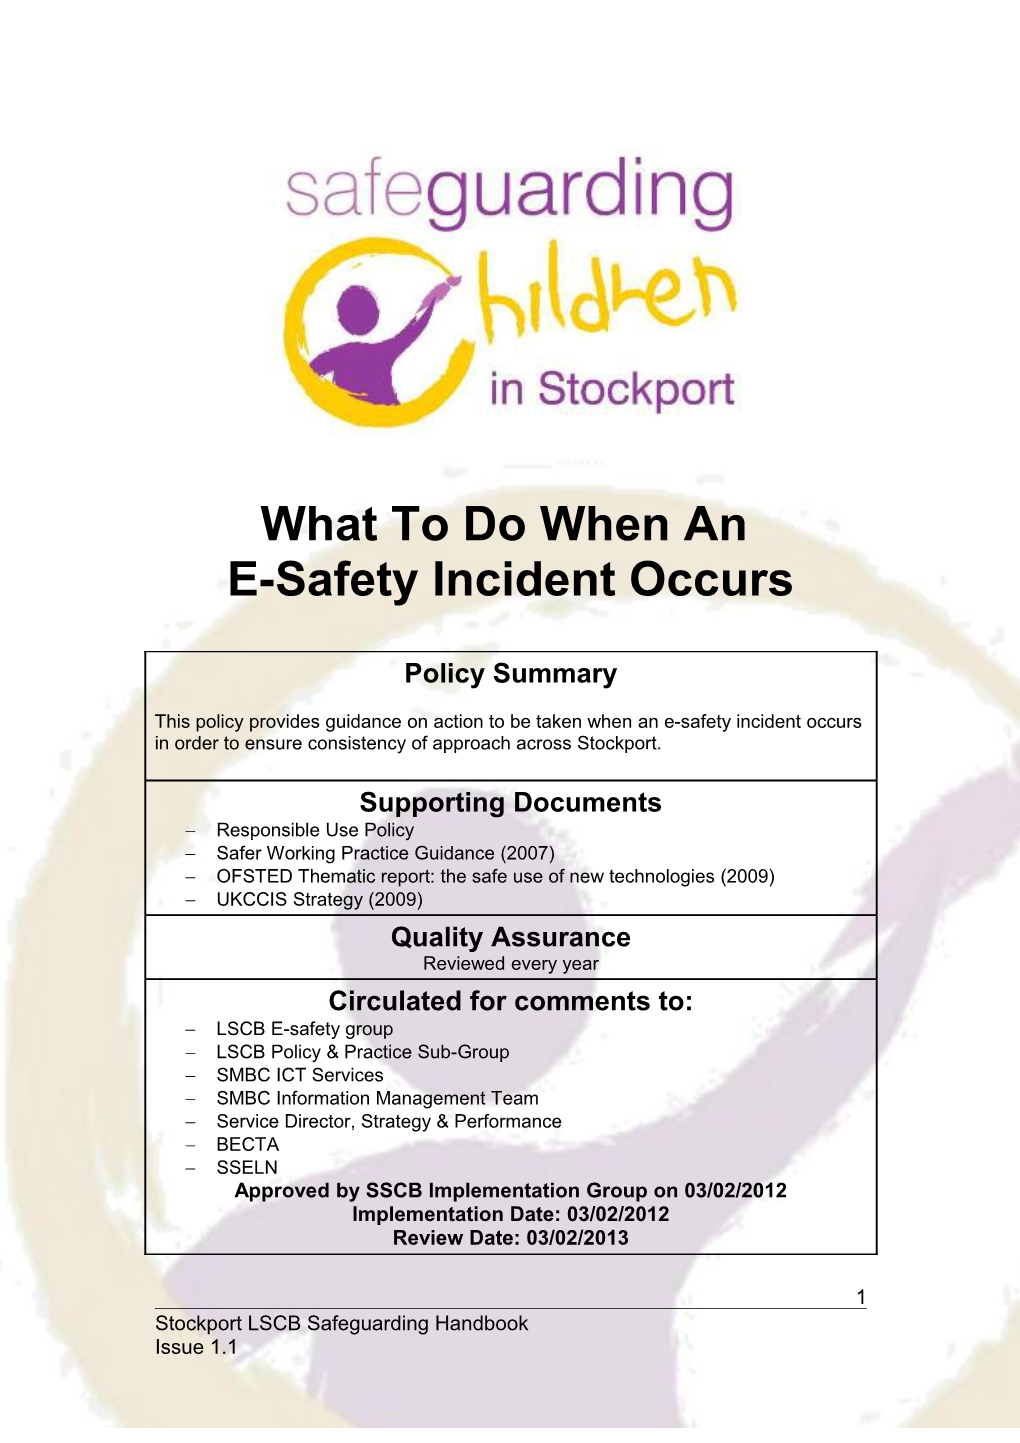 What to Do When an E-Safety Incident Occurs